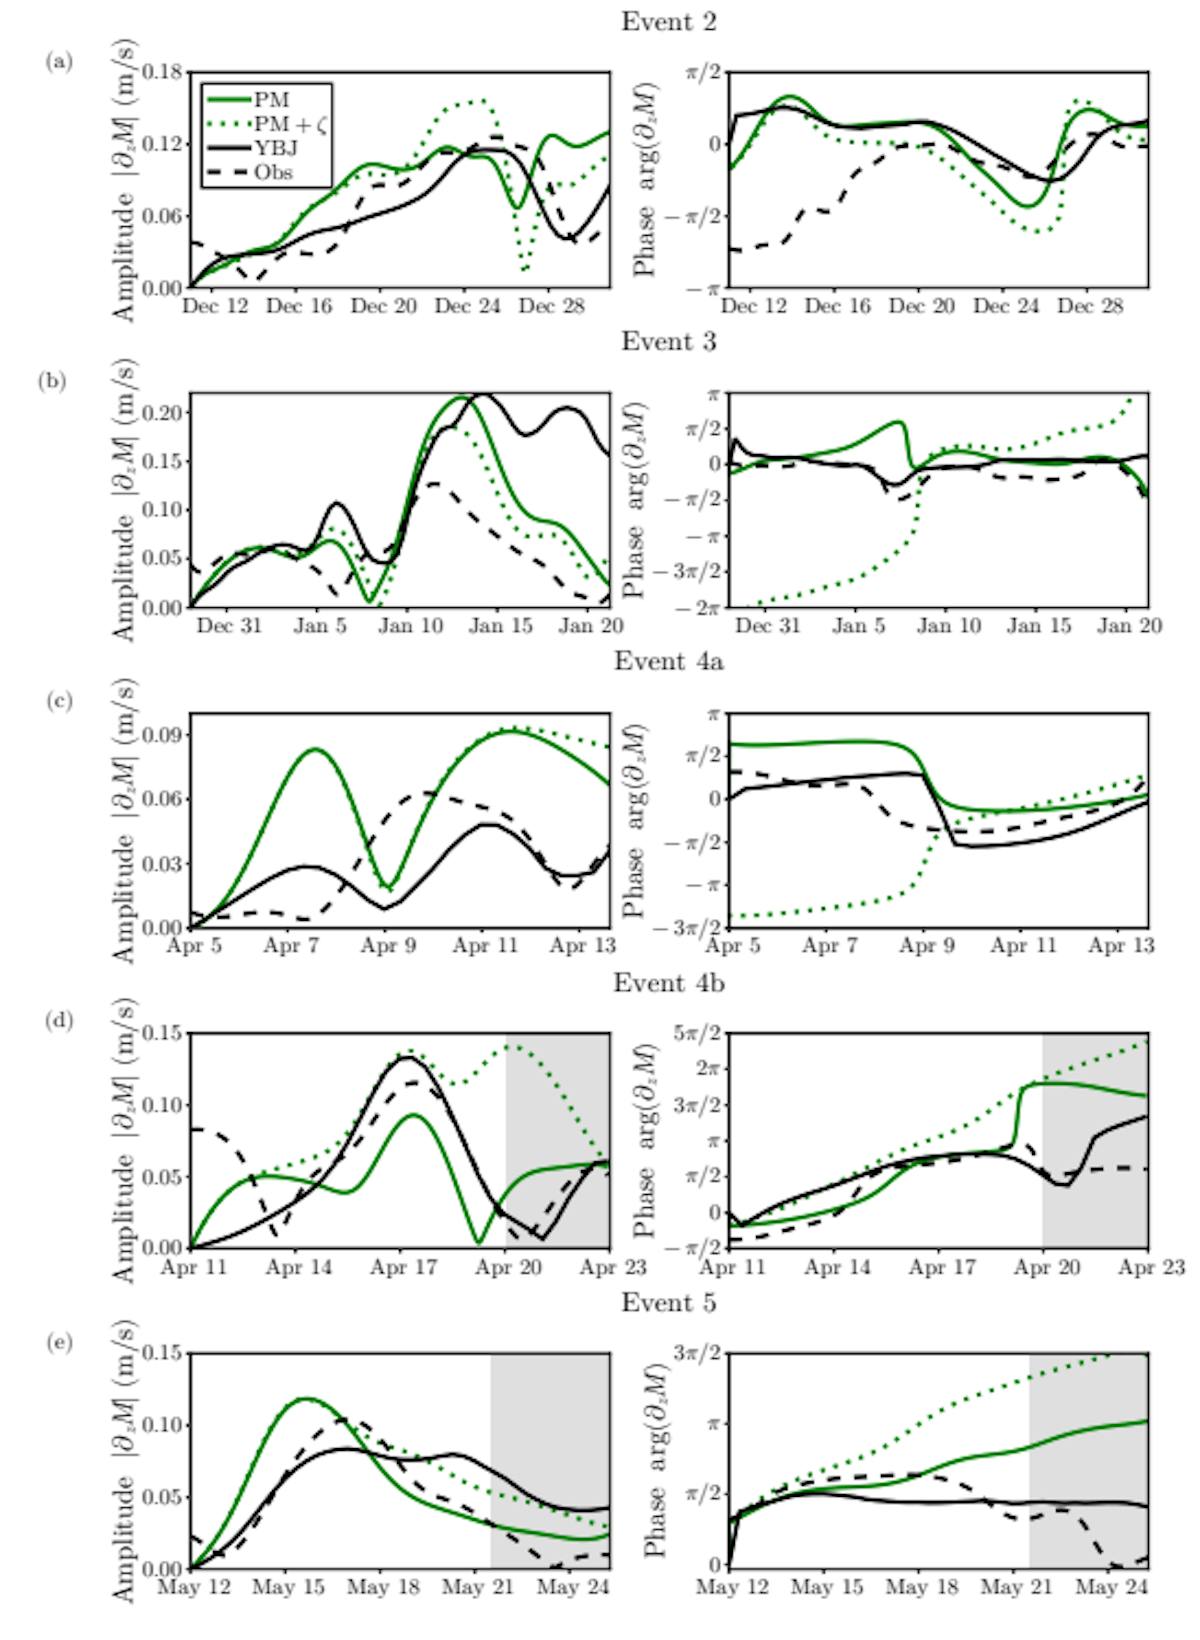 Fig. 8. NIW amplitude (left column) and NIW phase (right column) in observations at the central mooring (dashed black line) as compared to PM (solid green) PM+𝜁 (dotted green) and YBJ (solid black) for (a) event 2, 65 (b) event 3, (c) event 4a, (d) event 4b and (e) event 5.